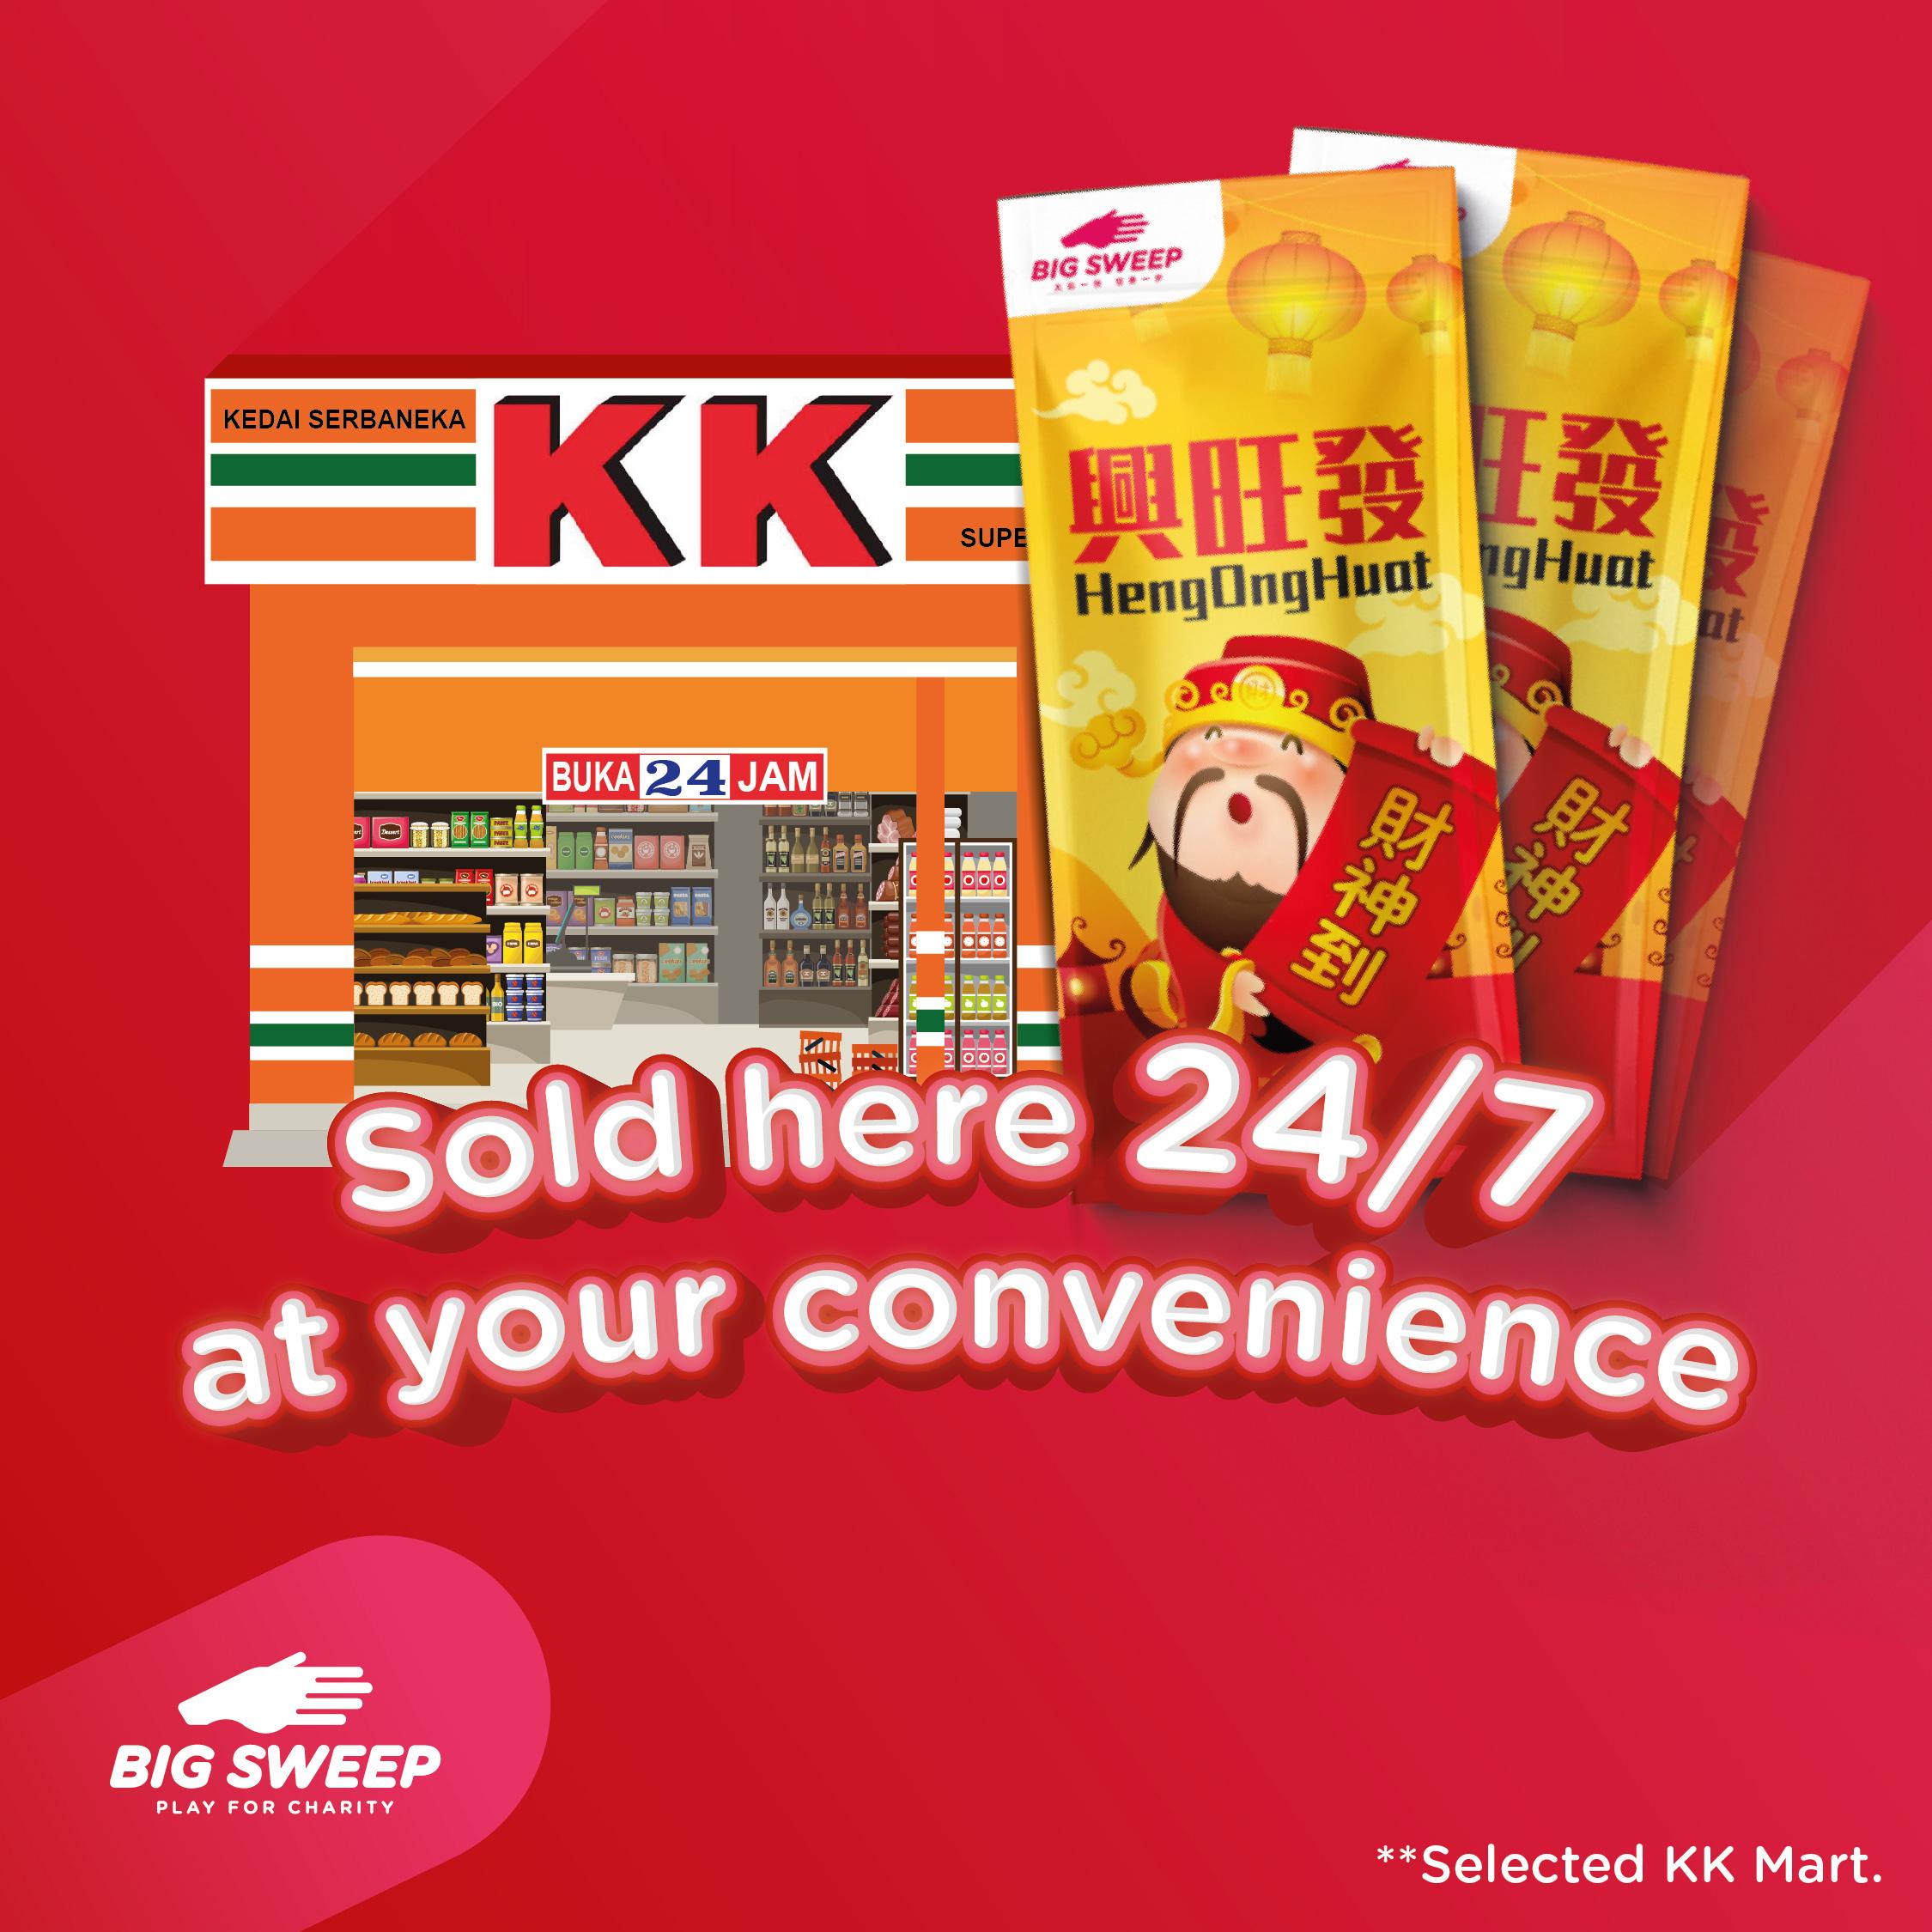 Big Sweep Golden Pack is available at selected KK mart outlet